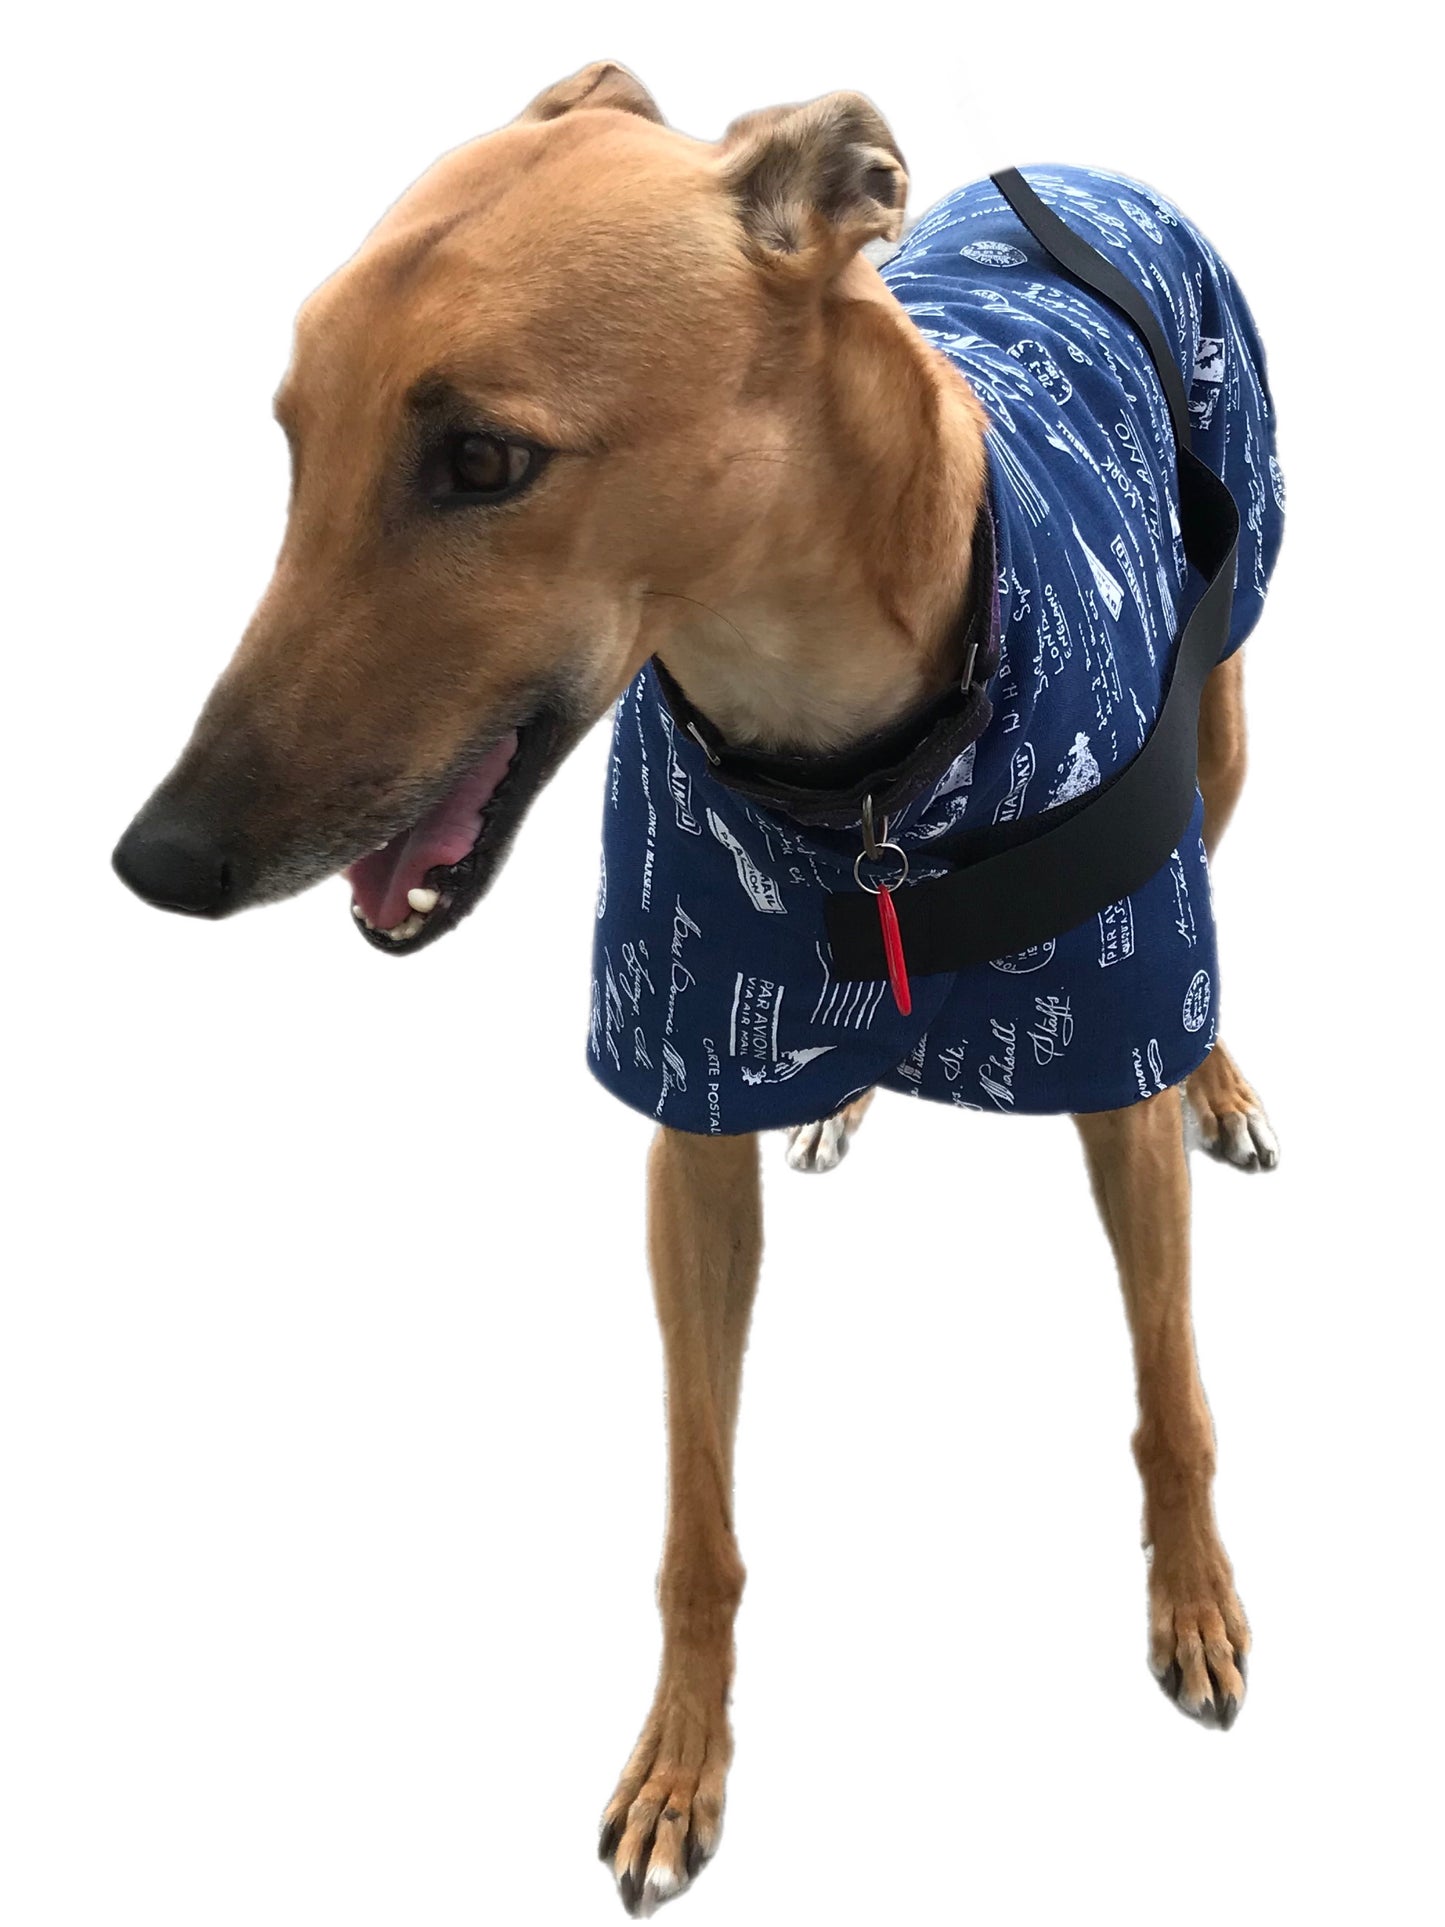 Autumn range classic style Greyhound ‘blue post’ coat in cotton & thick fleece washable